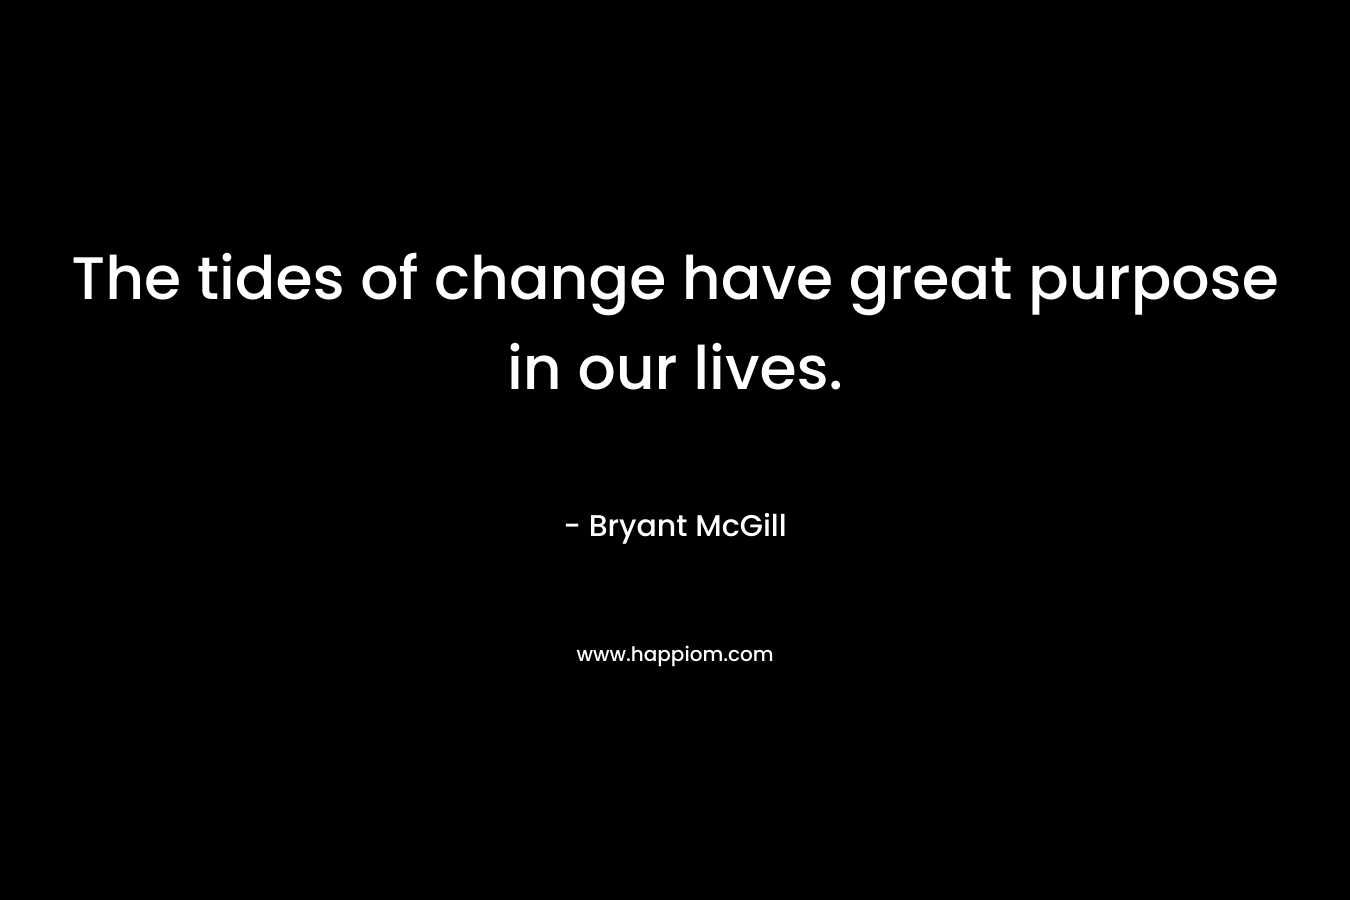 The tides of change have great purpose in our lives. – Bryant McGill